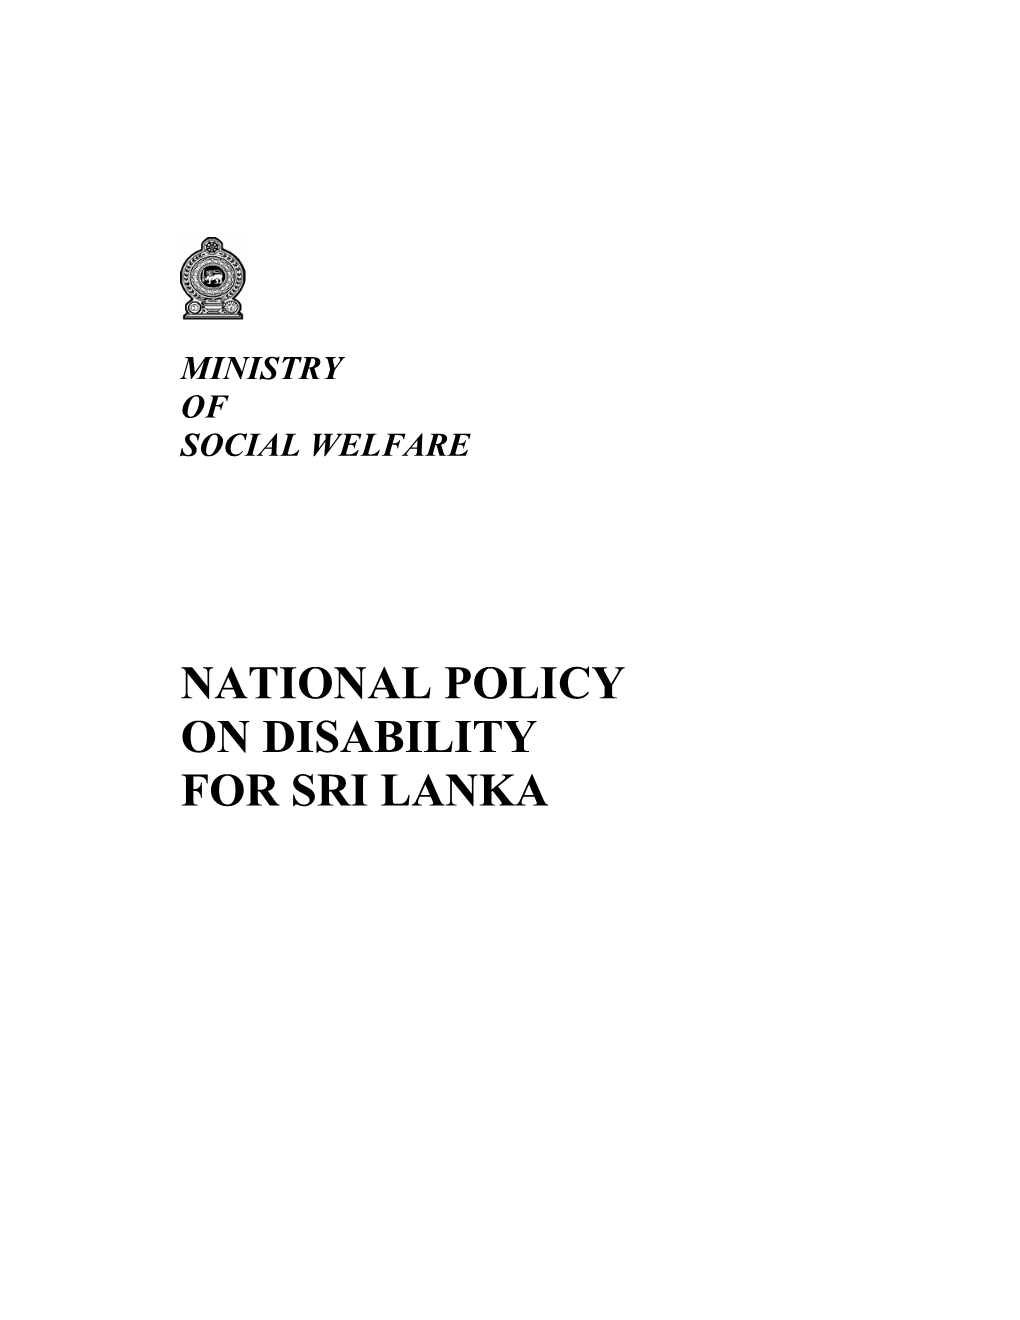 National Policy on Disability for Sri Lanka